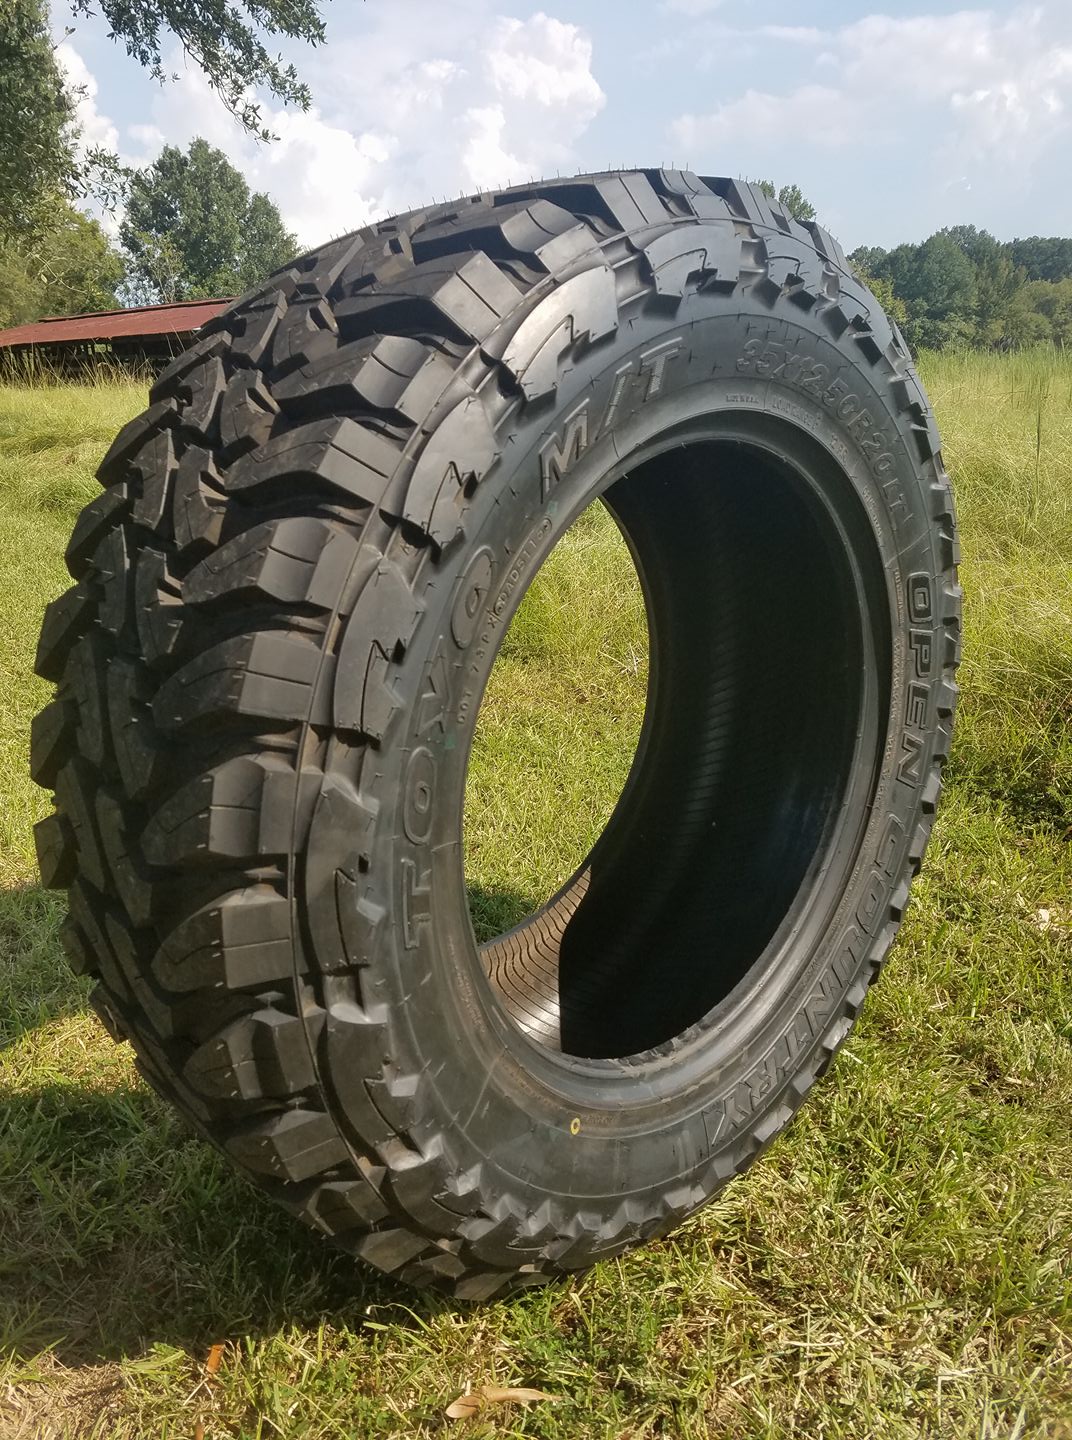 Cothern's Tire